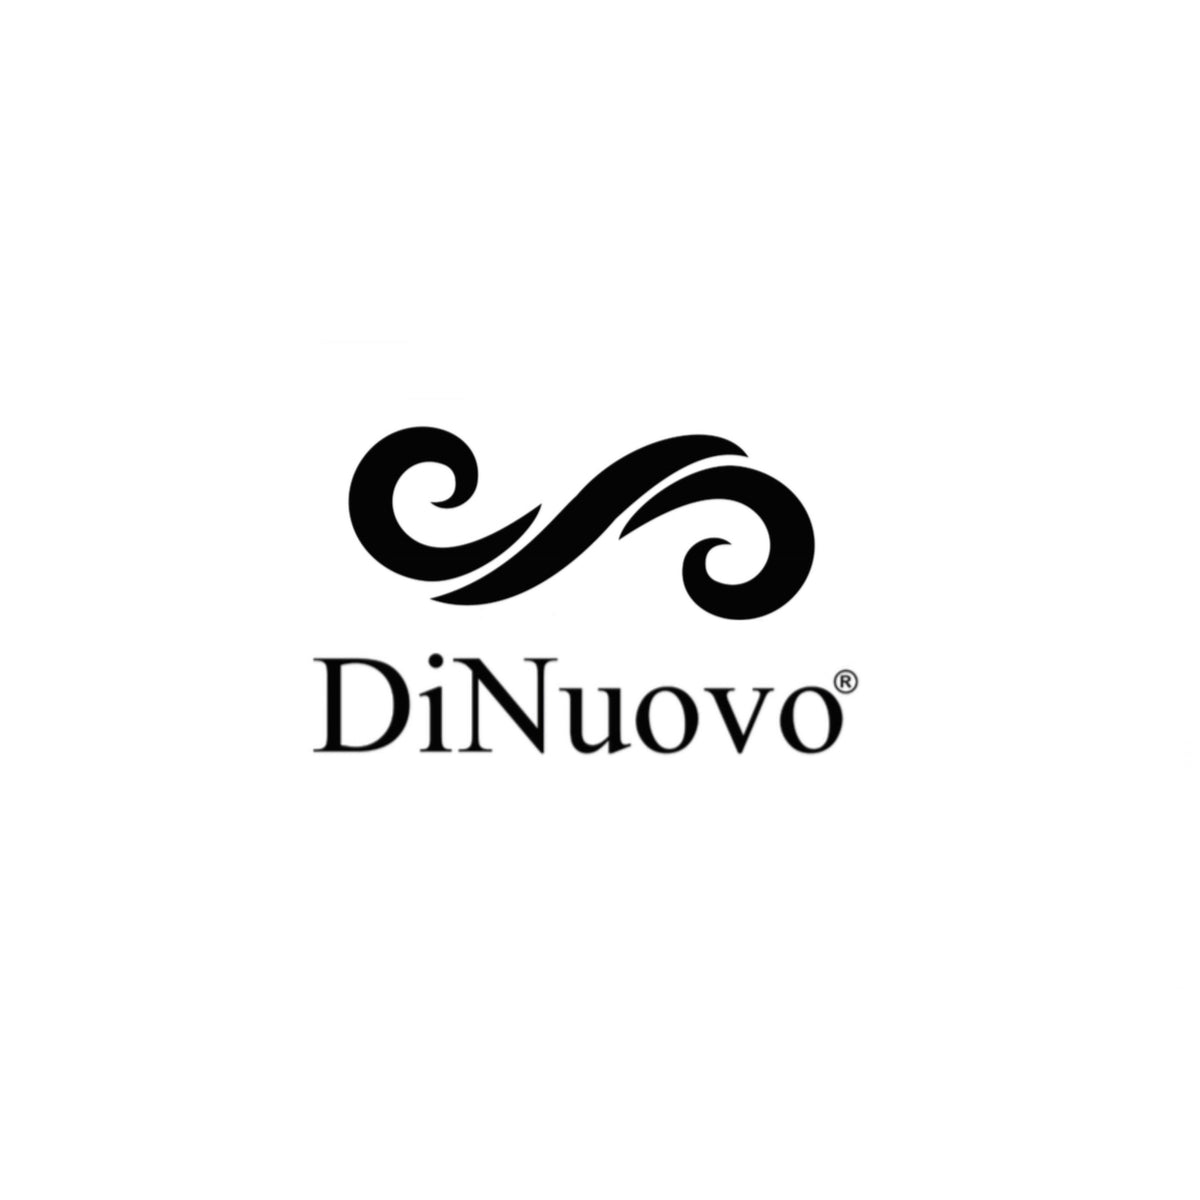 dinuovoshop.it